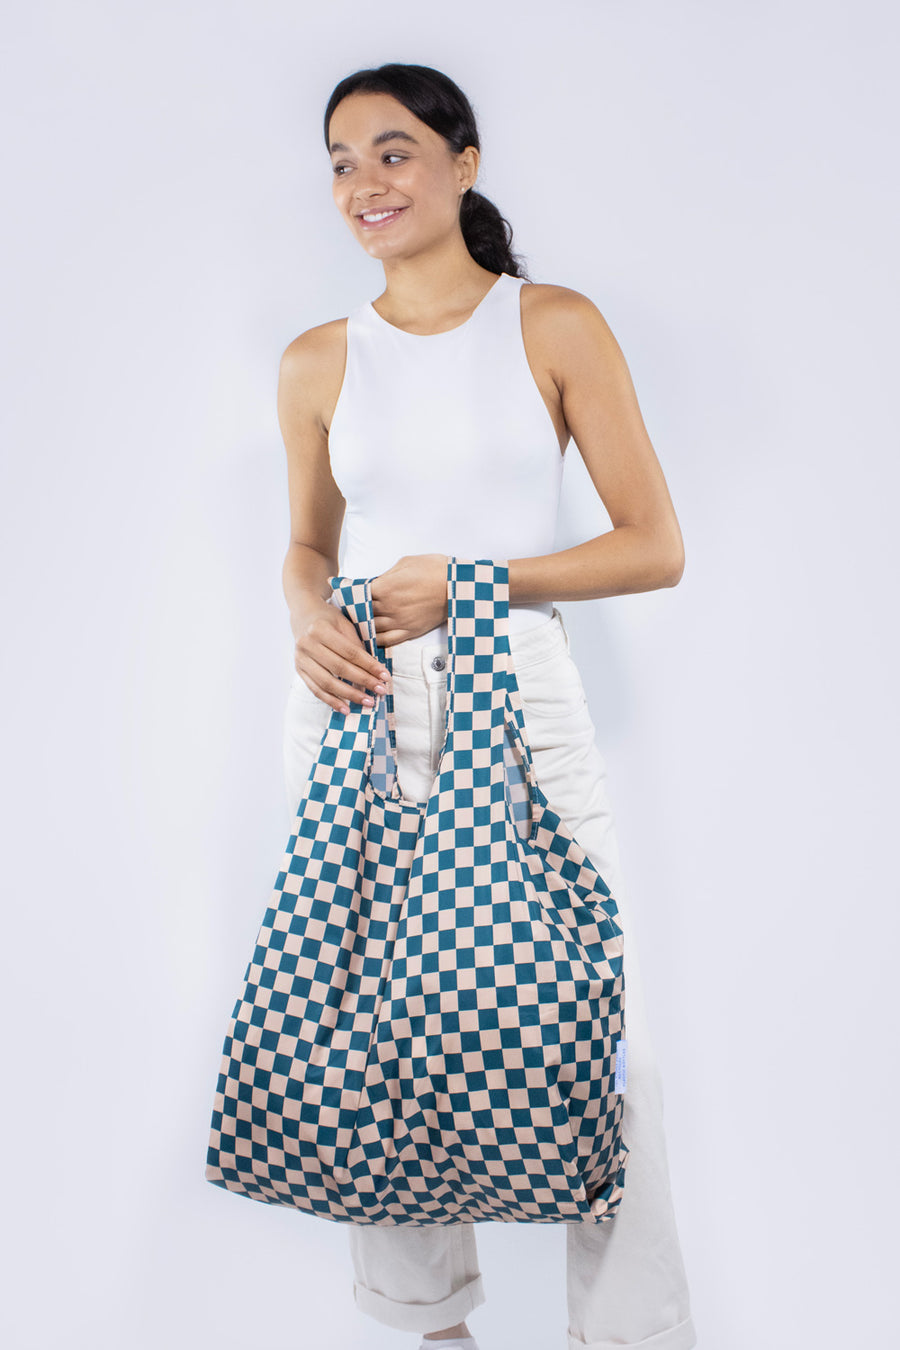 Checkerboard Teal & Beige | Extra Large Reusable Bag